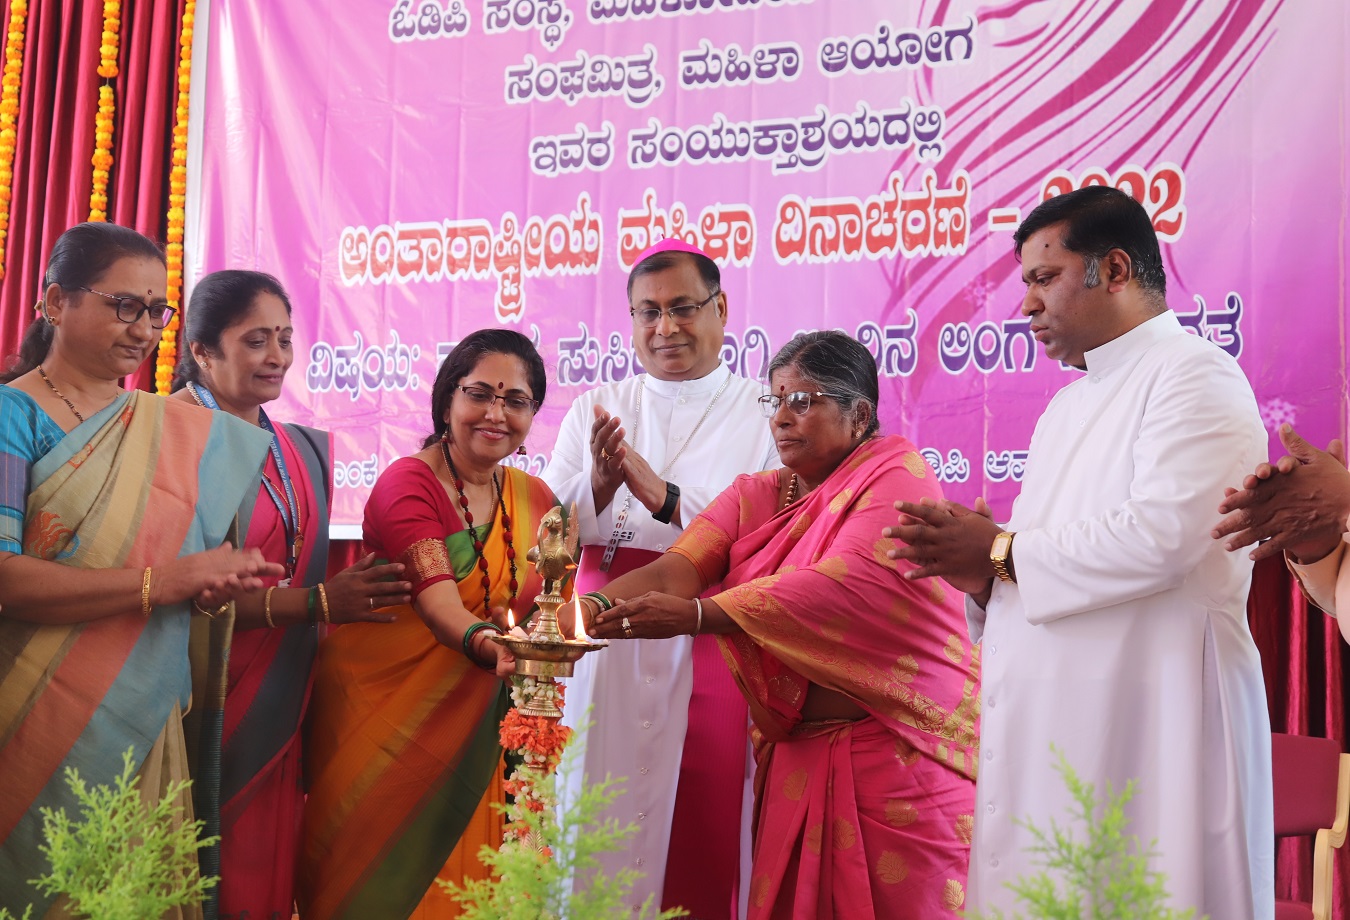 Dignitaries inaugurating The Women's Day Program by igniting the lamp